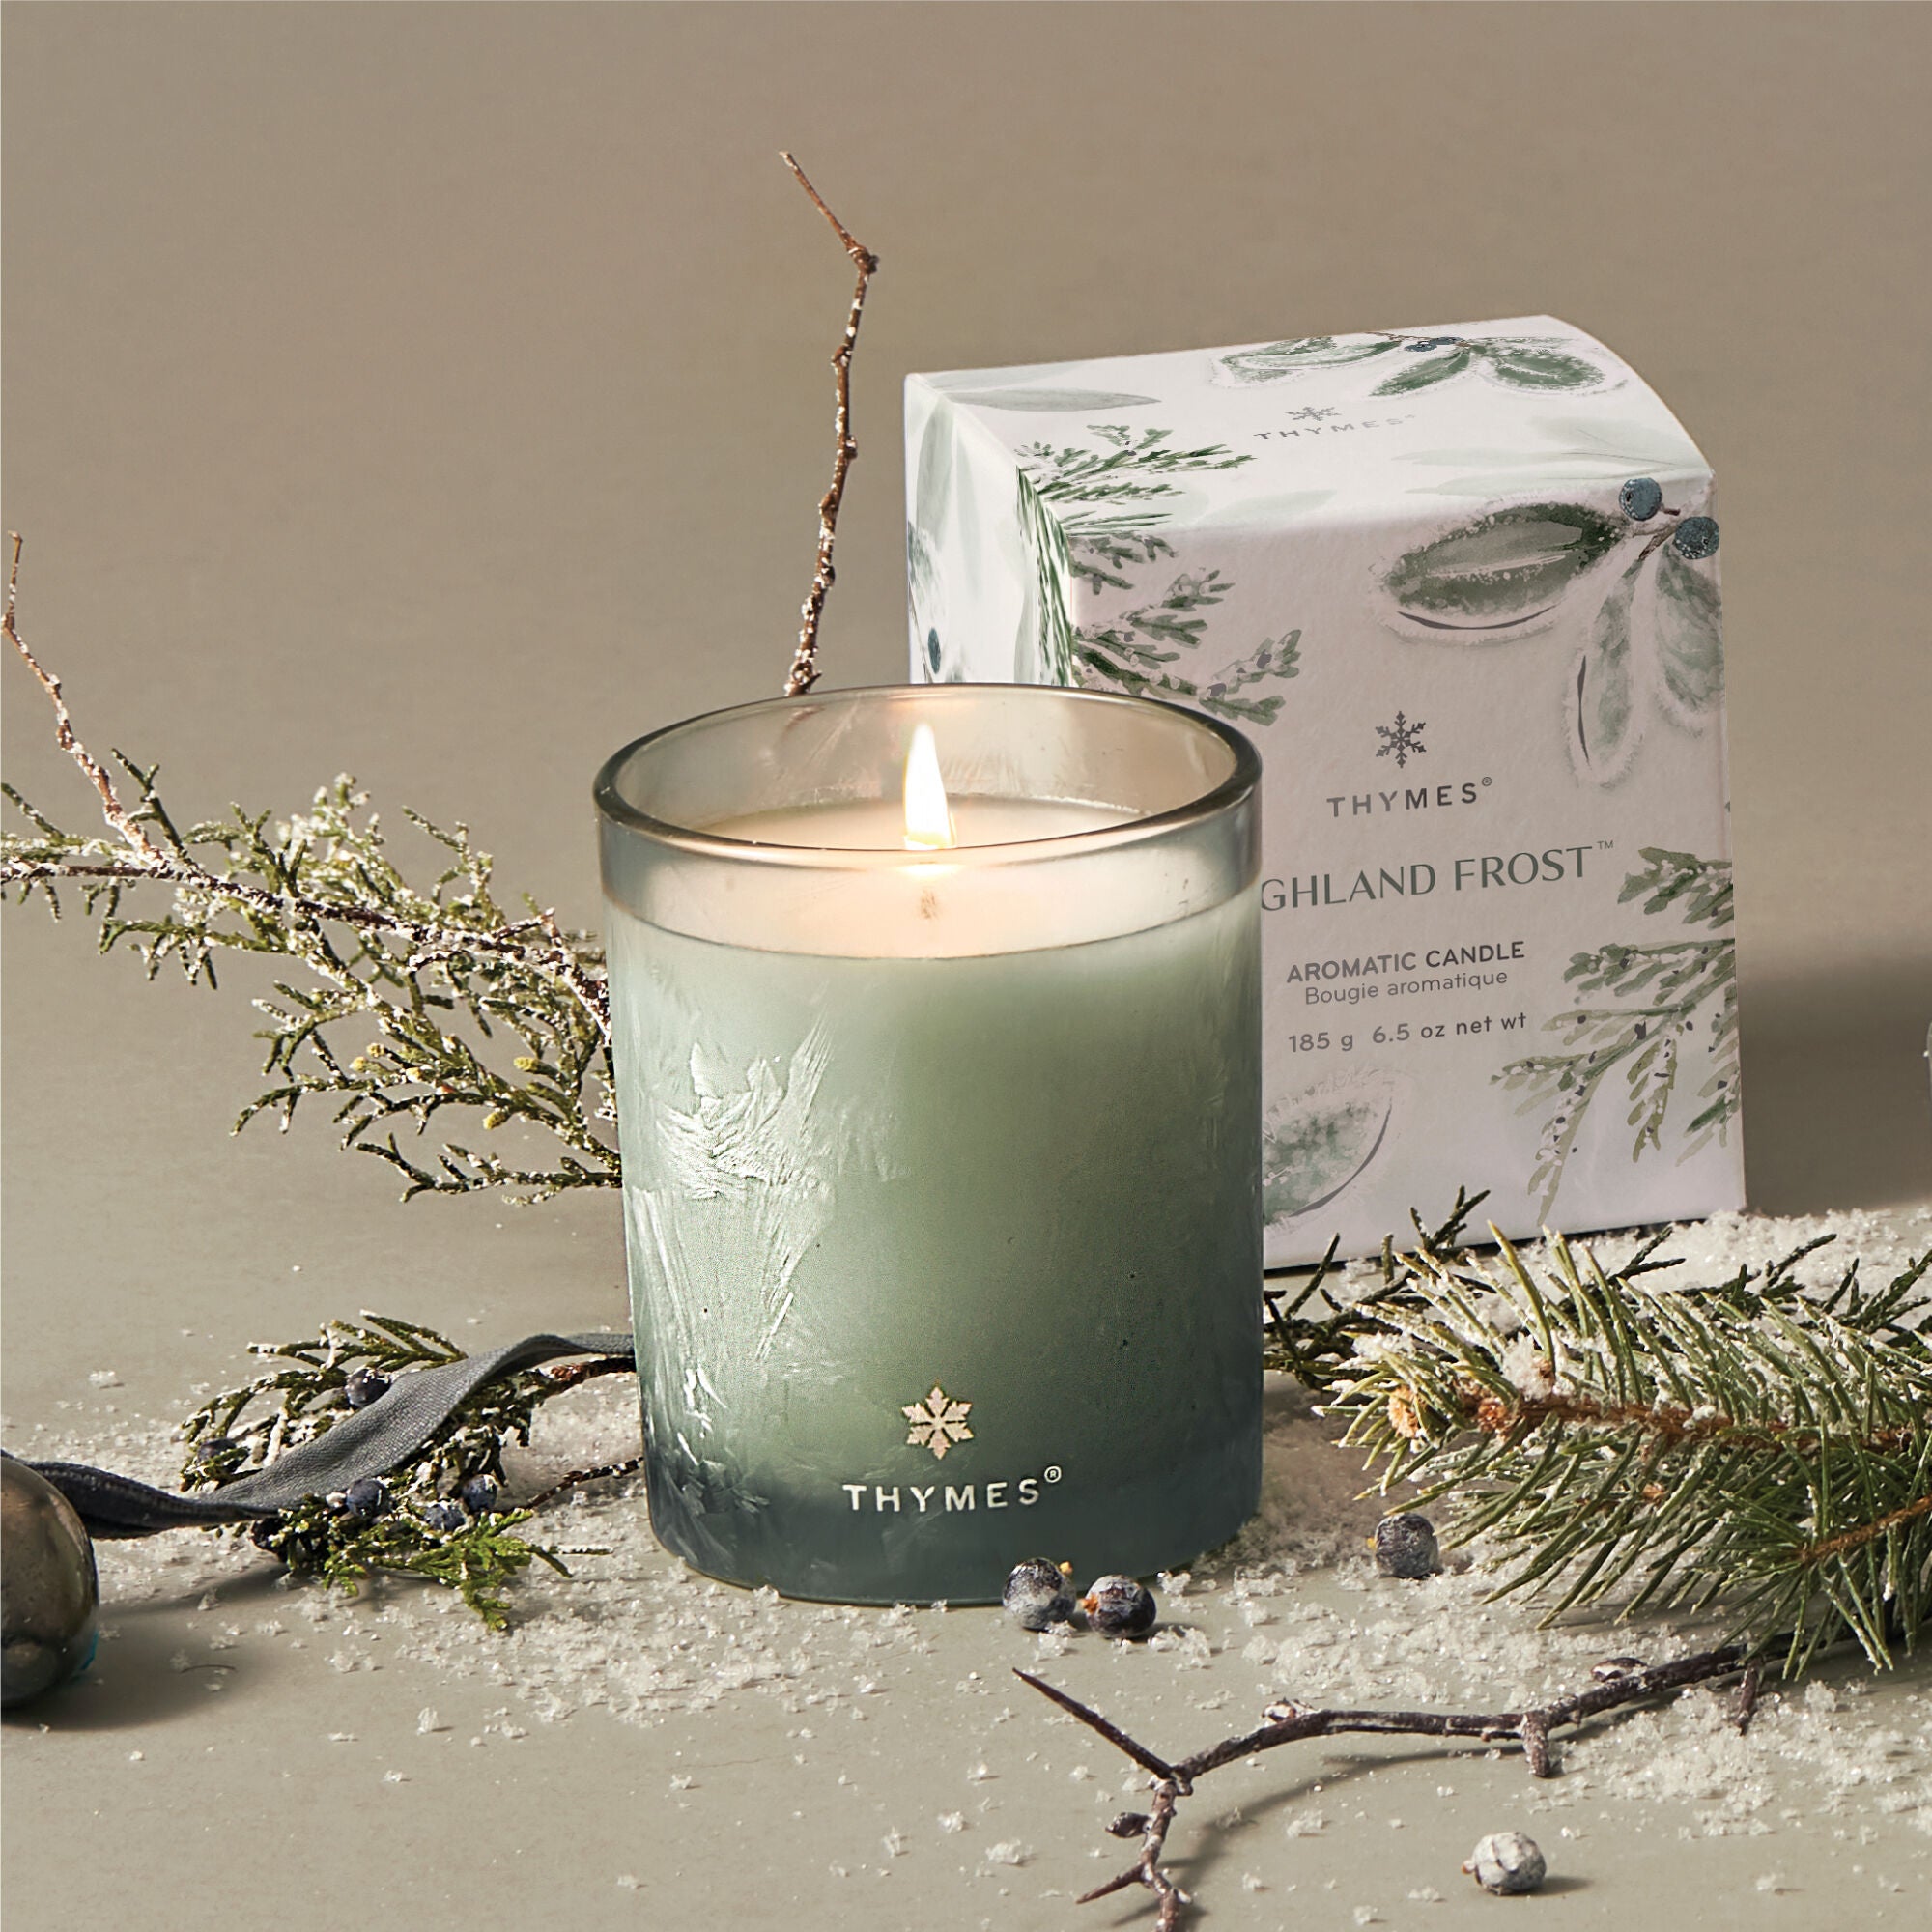 Thymes Highland Frost - Boxed Candle | 6.5oz